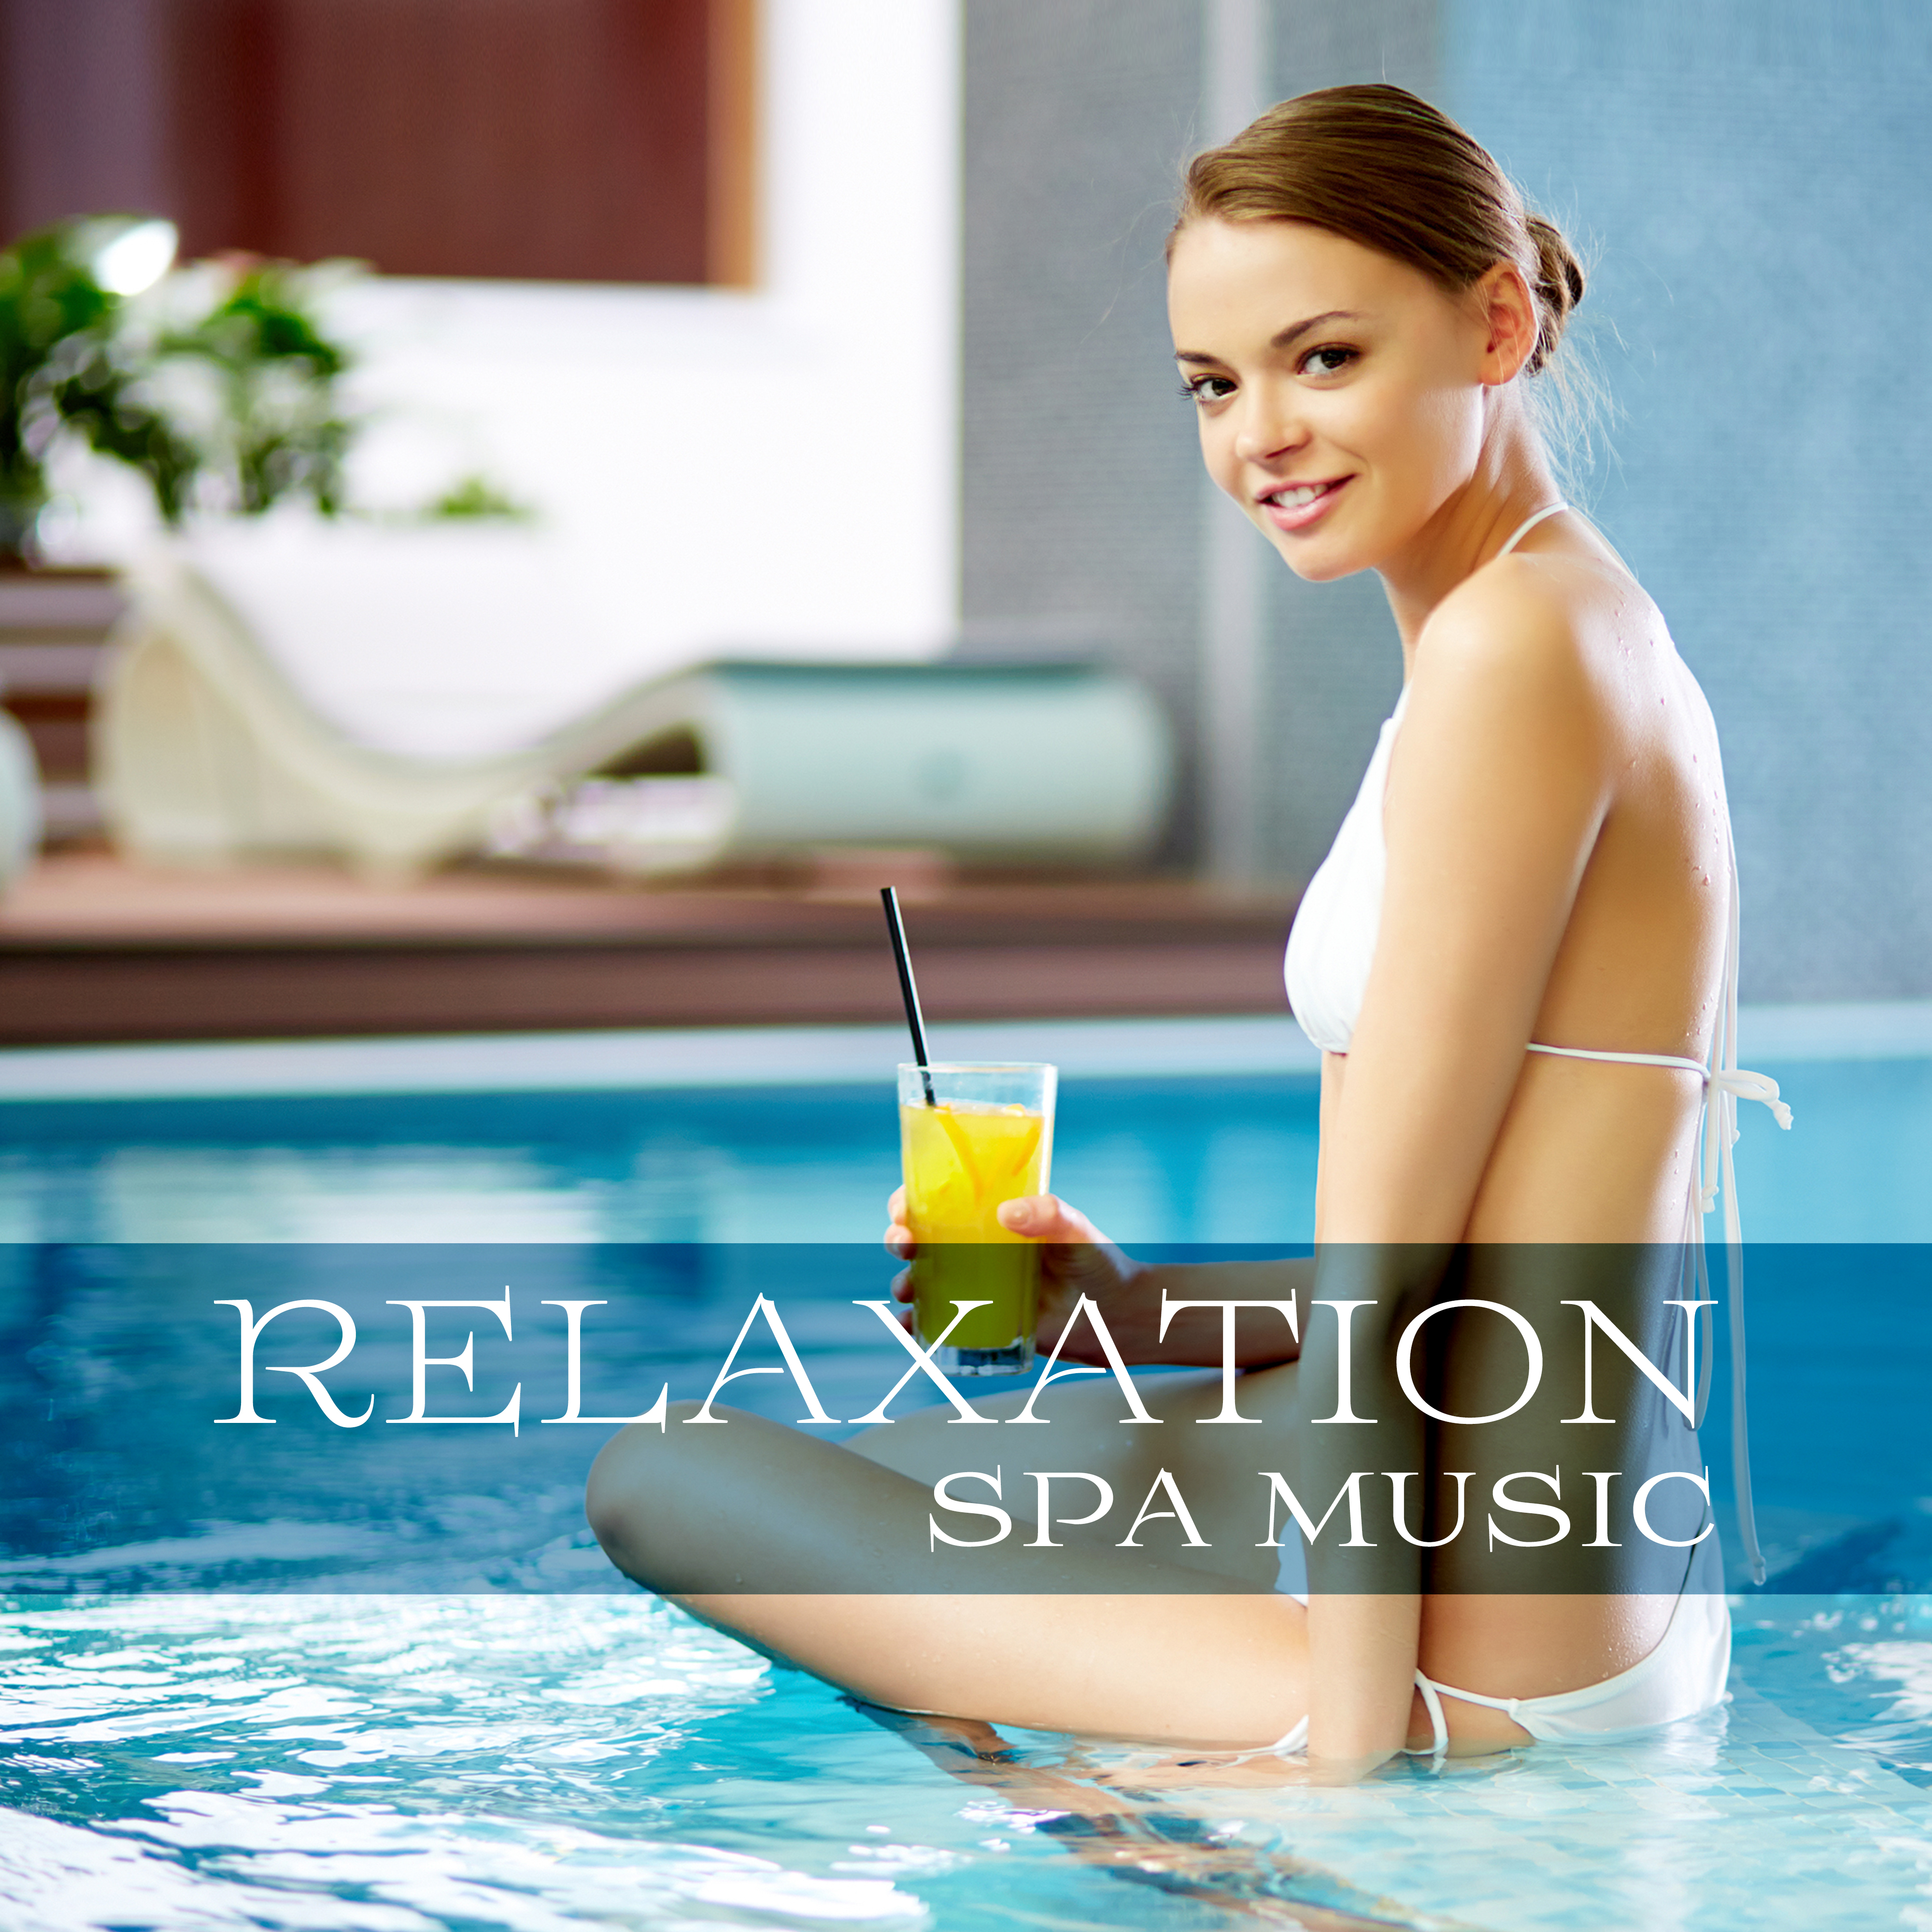 Relaxation Spa Music – Pure Massage, Soothing Wellness, Nature Sounds Reduce Stress, Zen